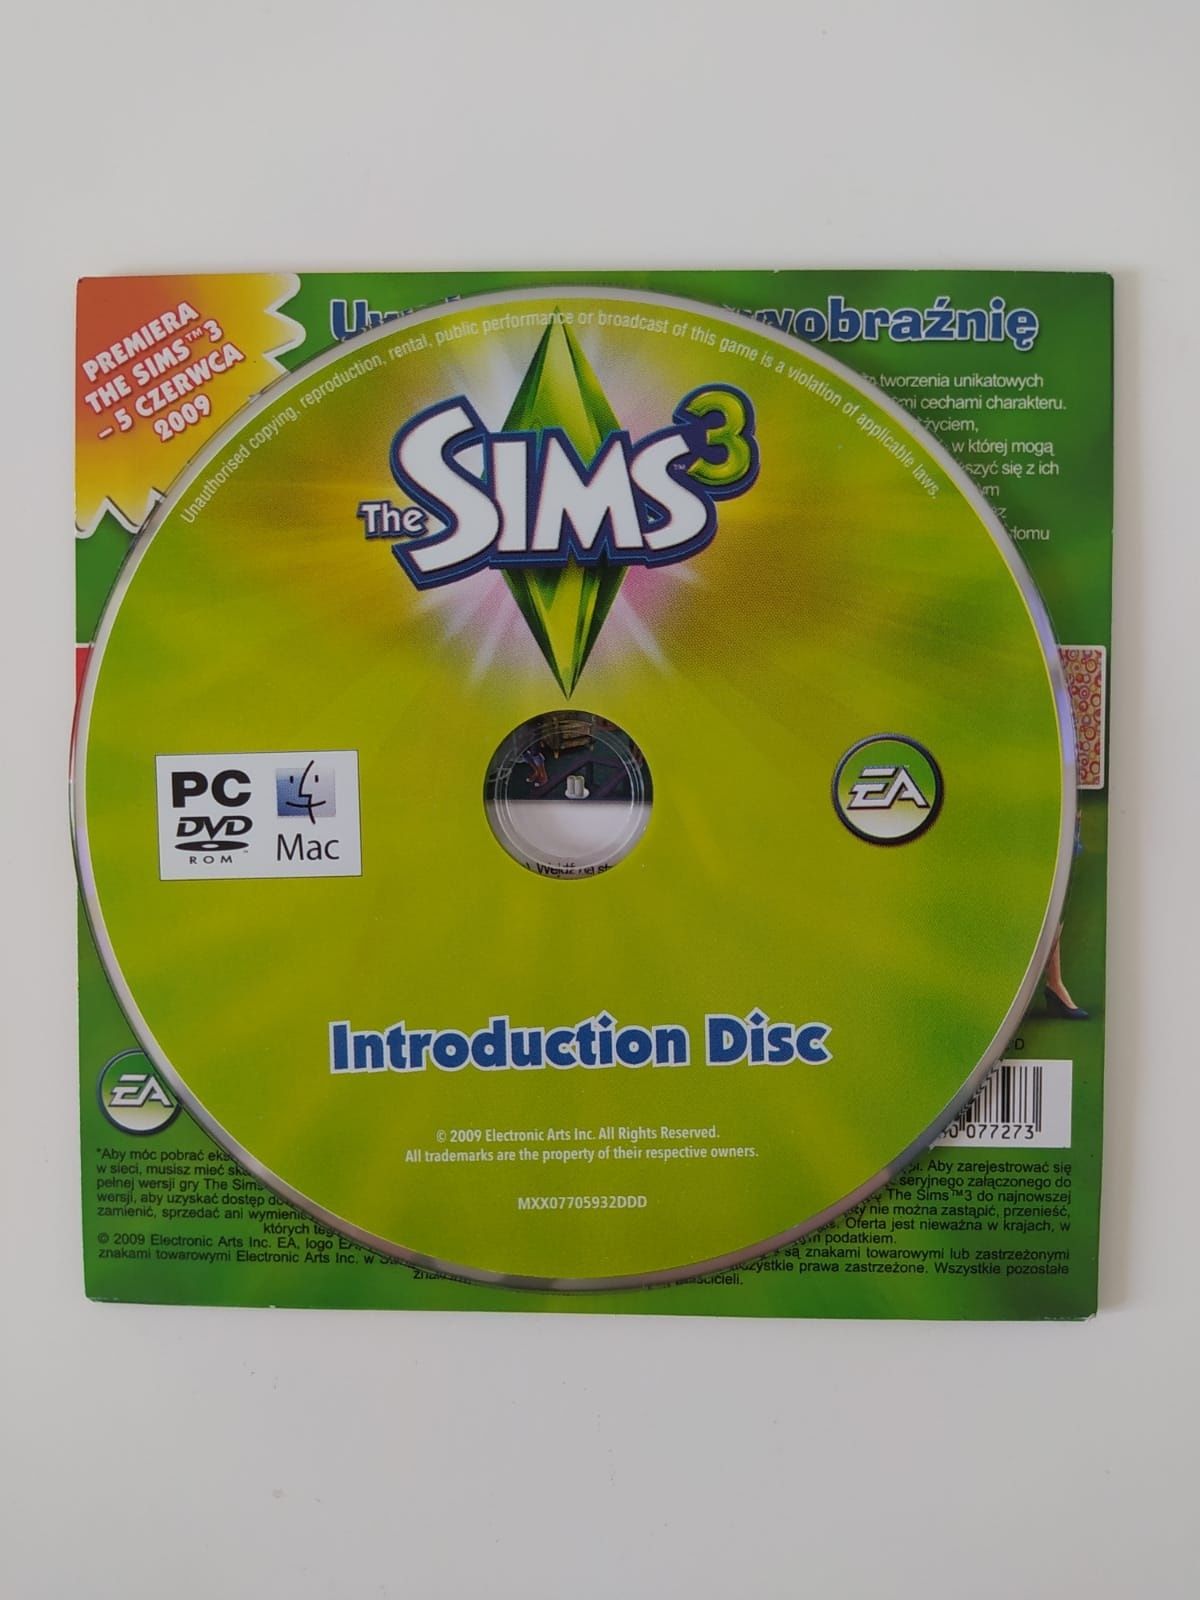 The Sims 3 "Intro"